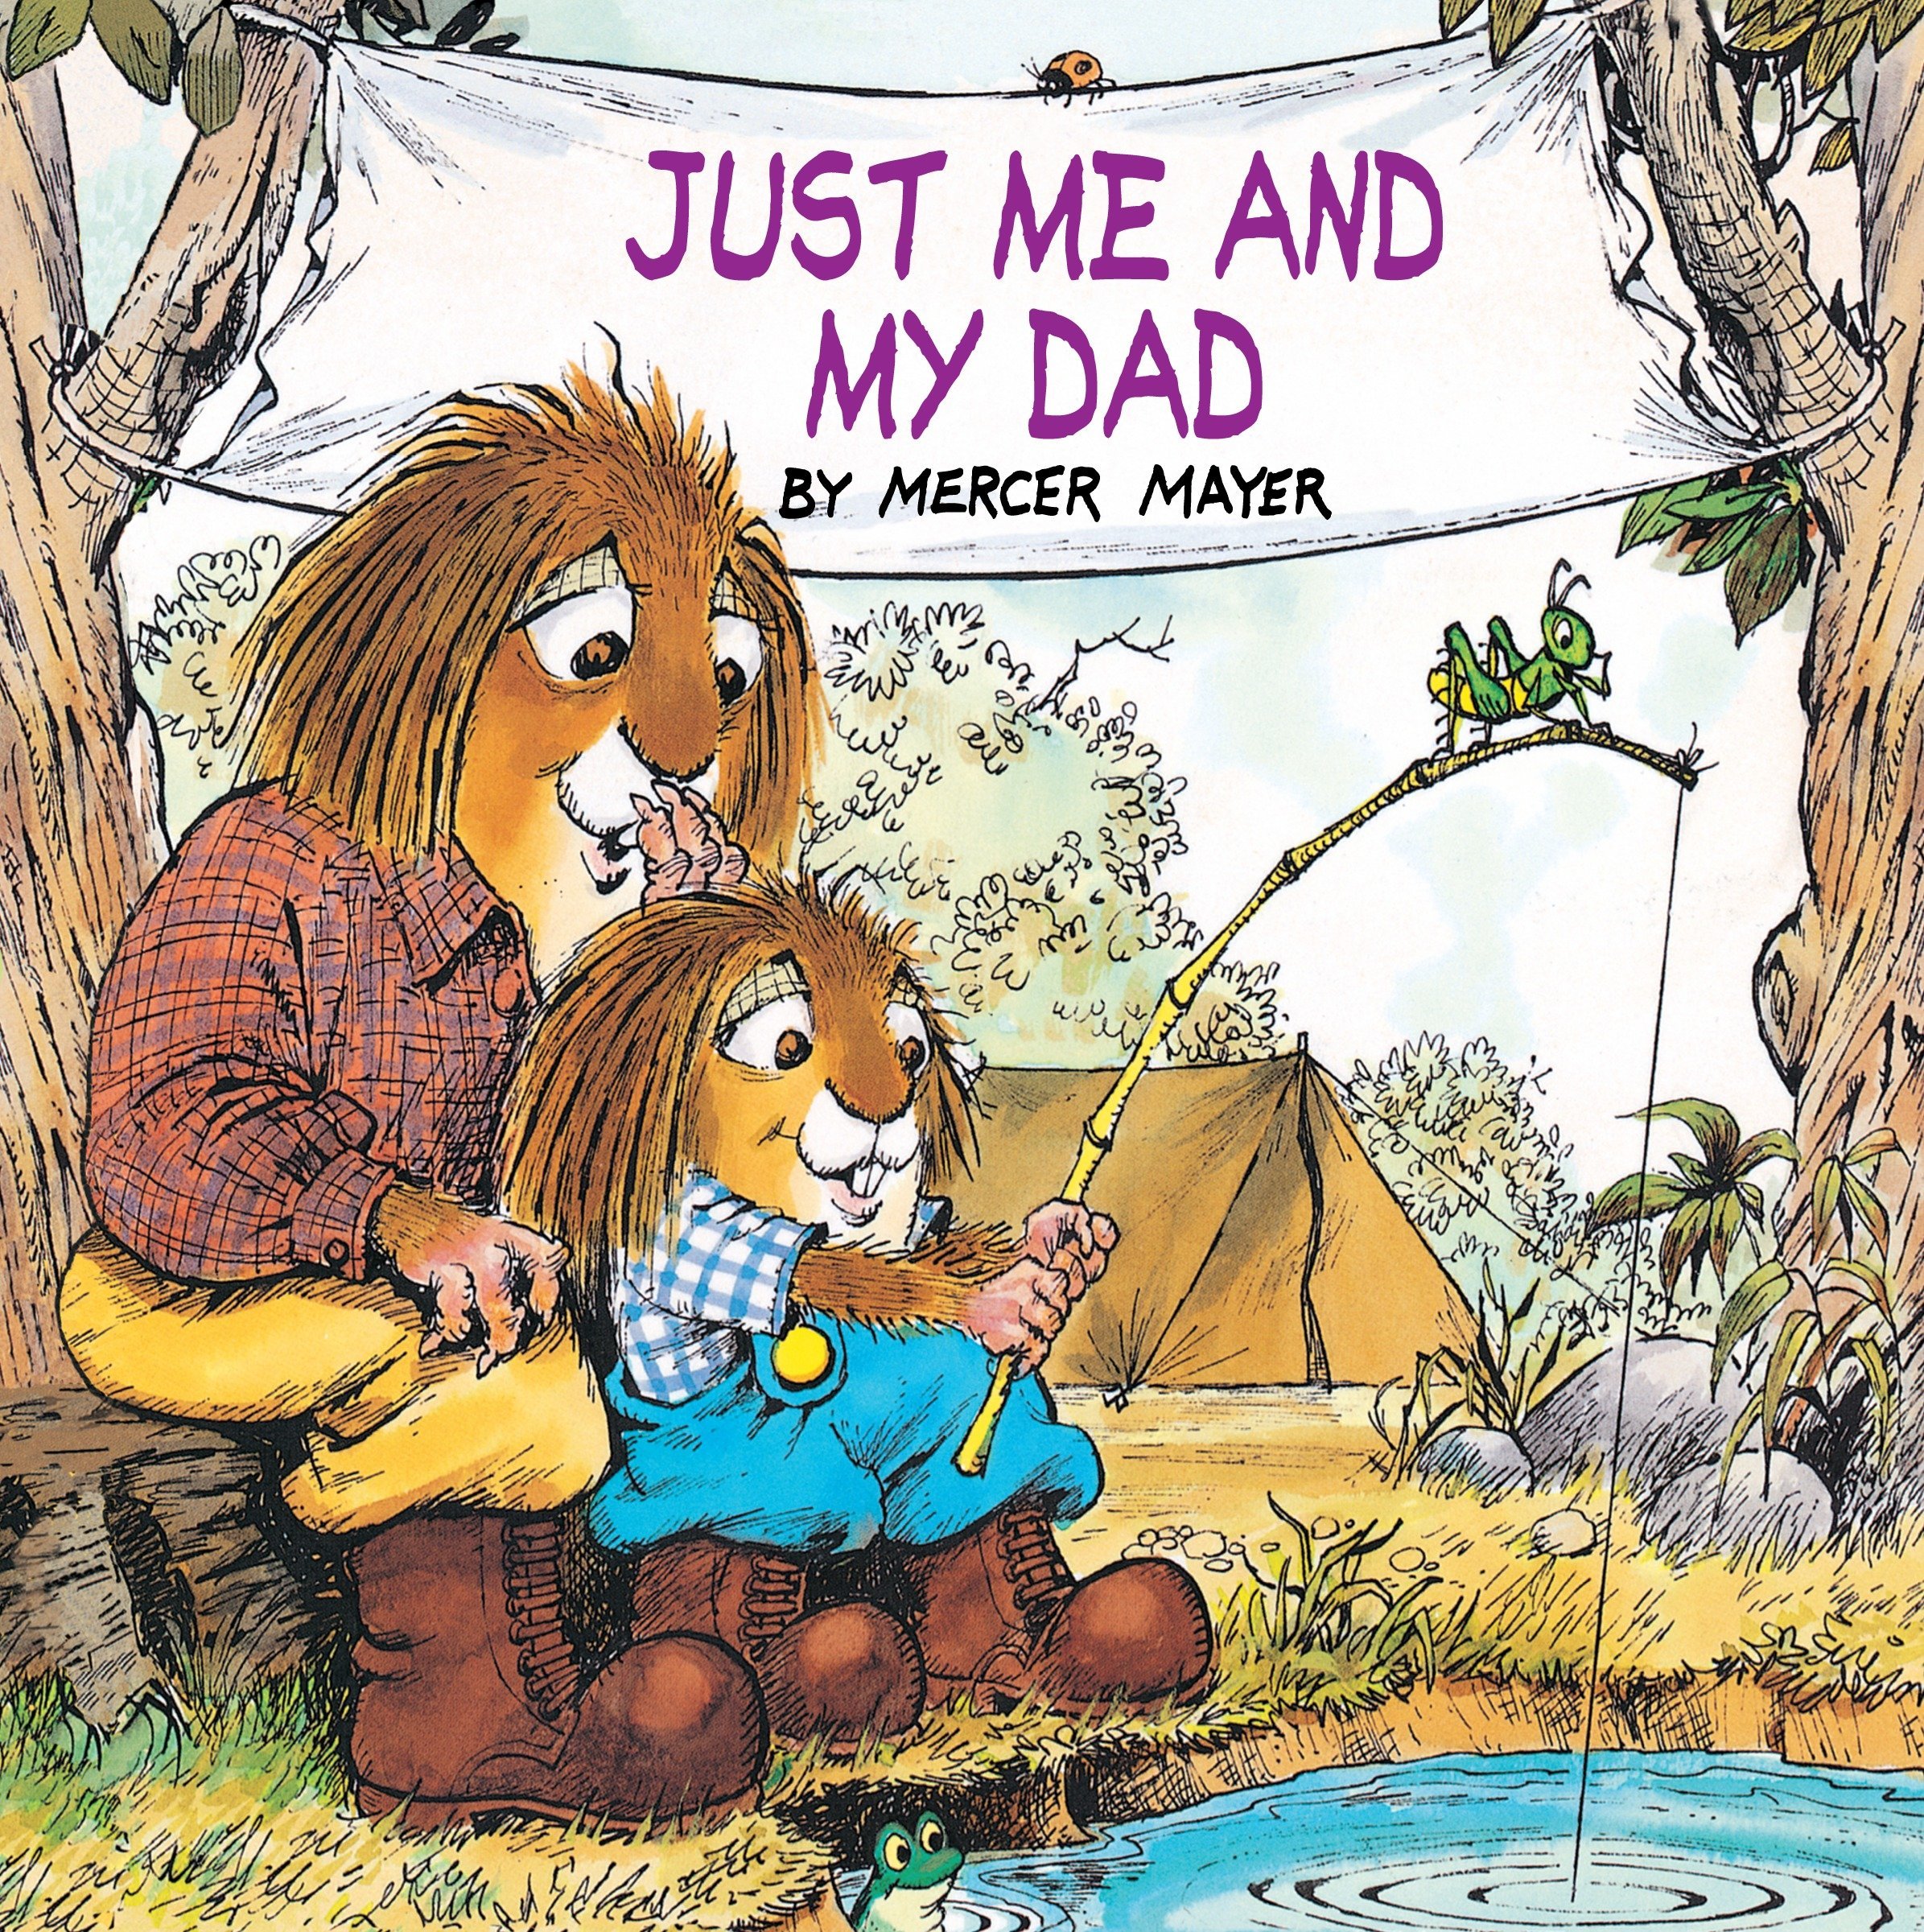 speech and language teaching concepts for Just Me and My Dad in speech therapy​ ​